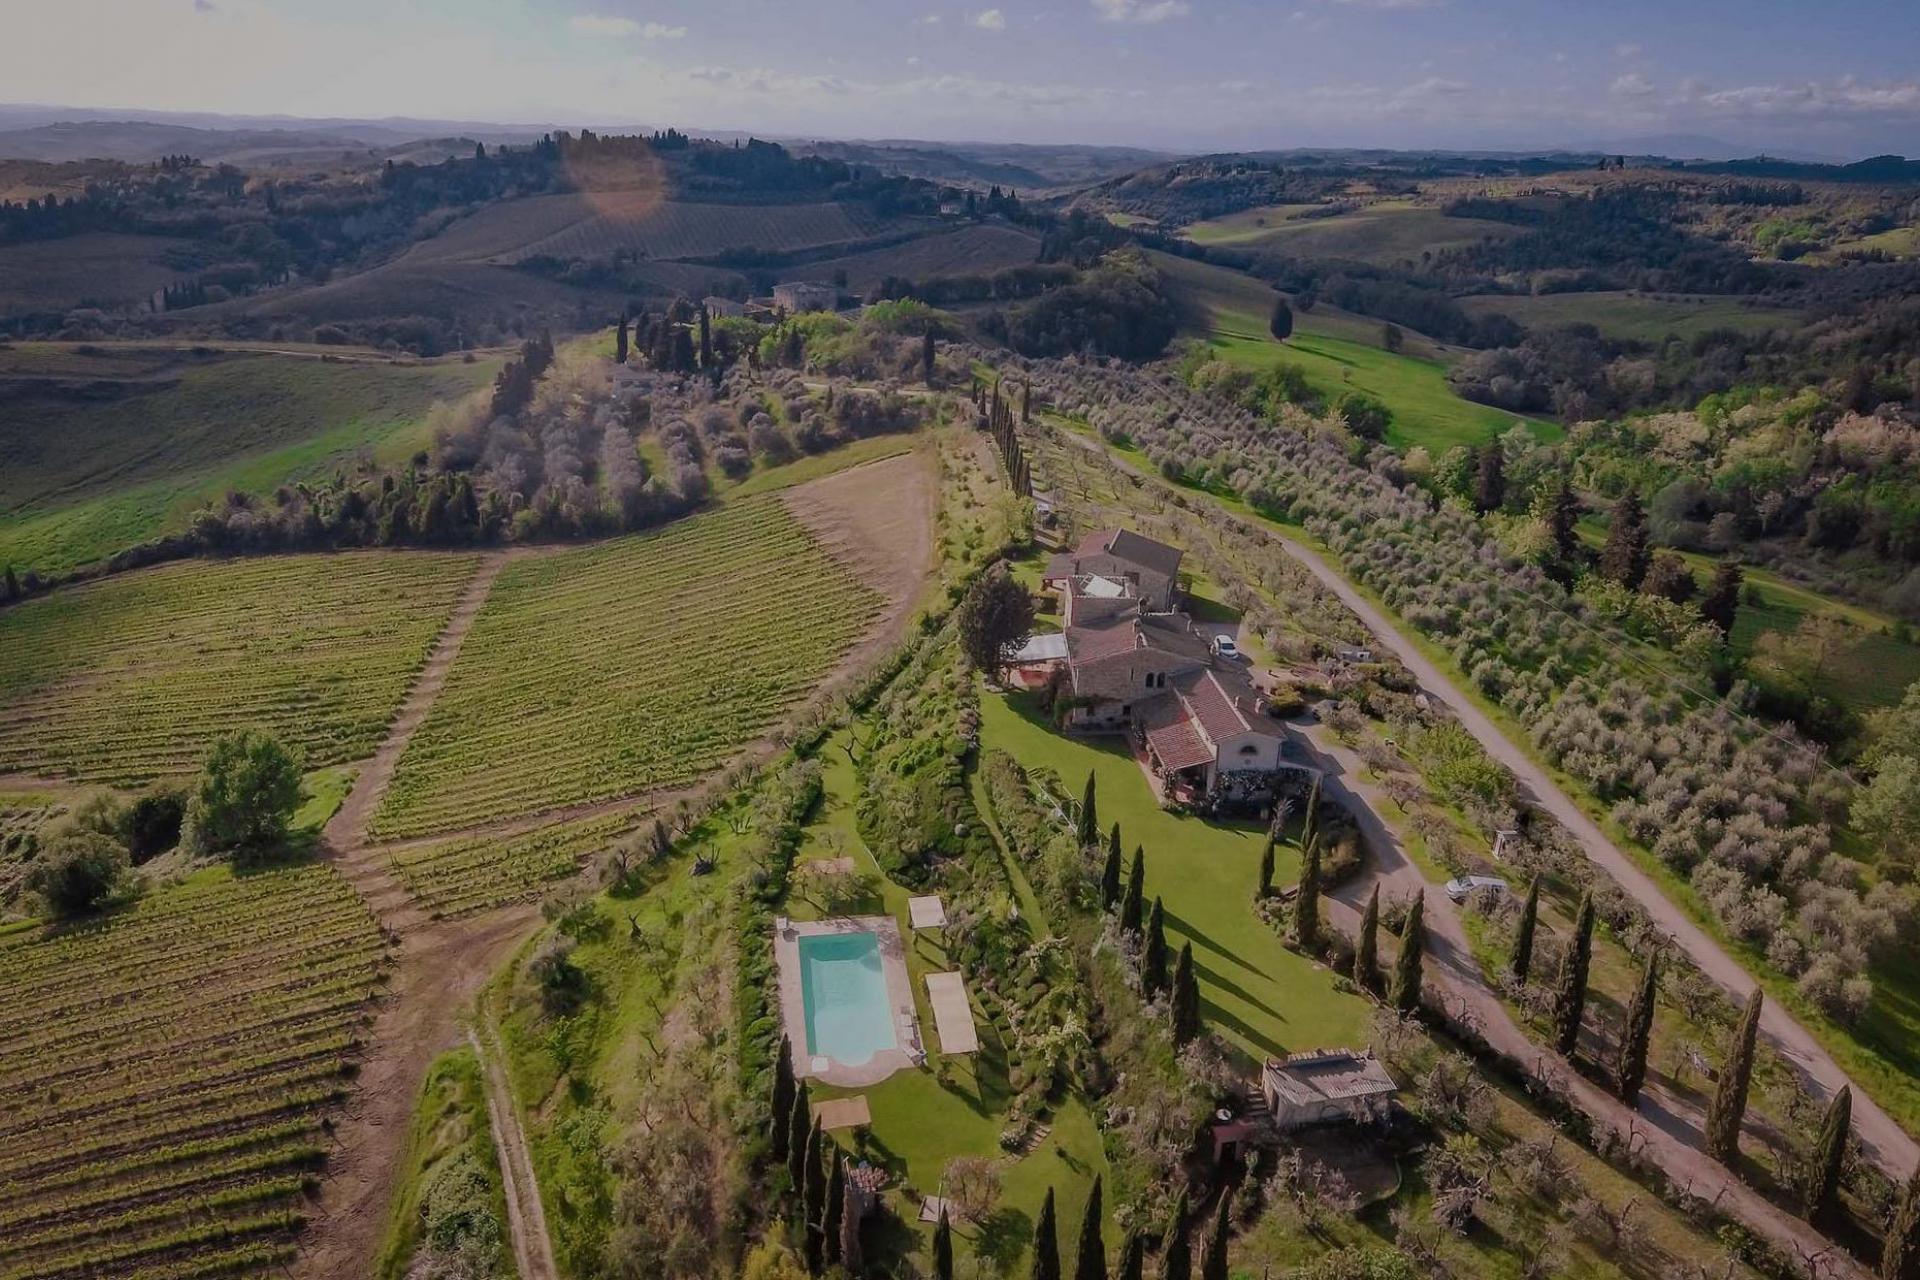 Agriturismo Tuscany in olivegrove with amazing views